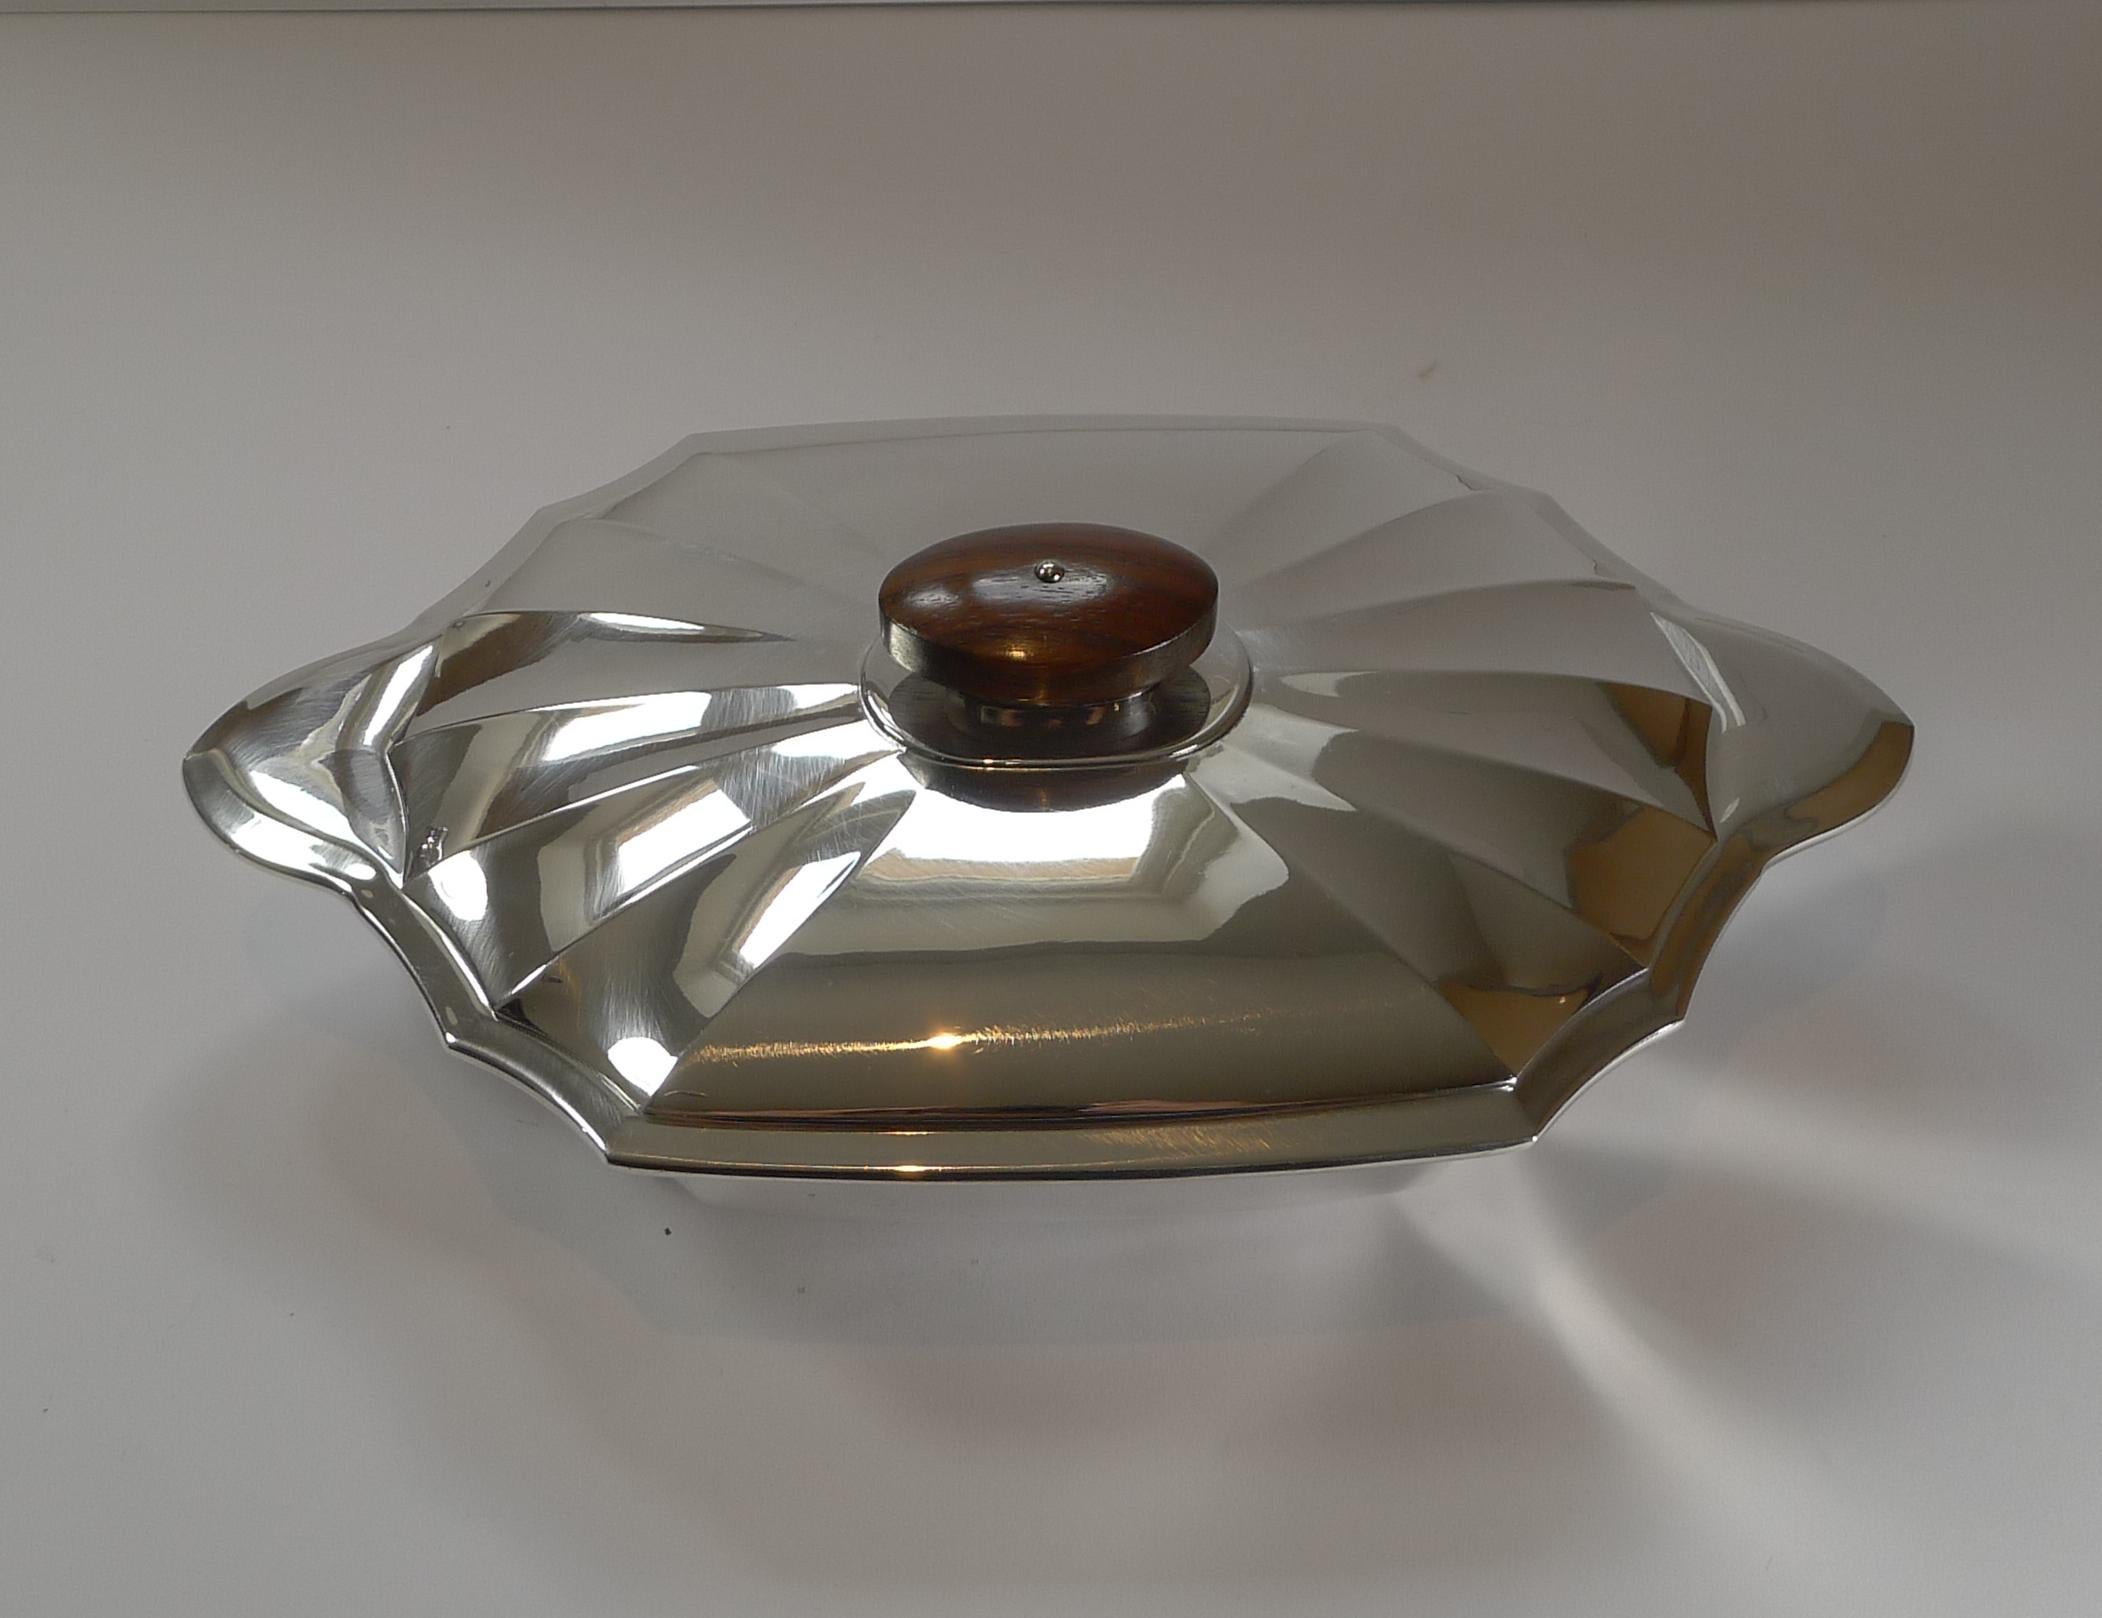 French Art Deco Christofle / Gallia Covered Serving Dish, c. 1930 For Sale 2